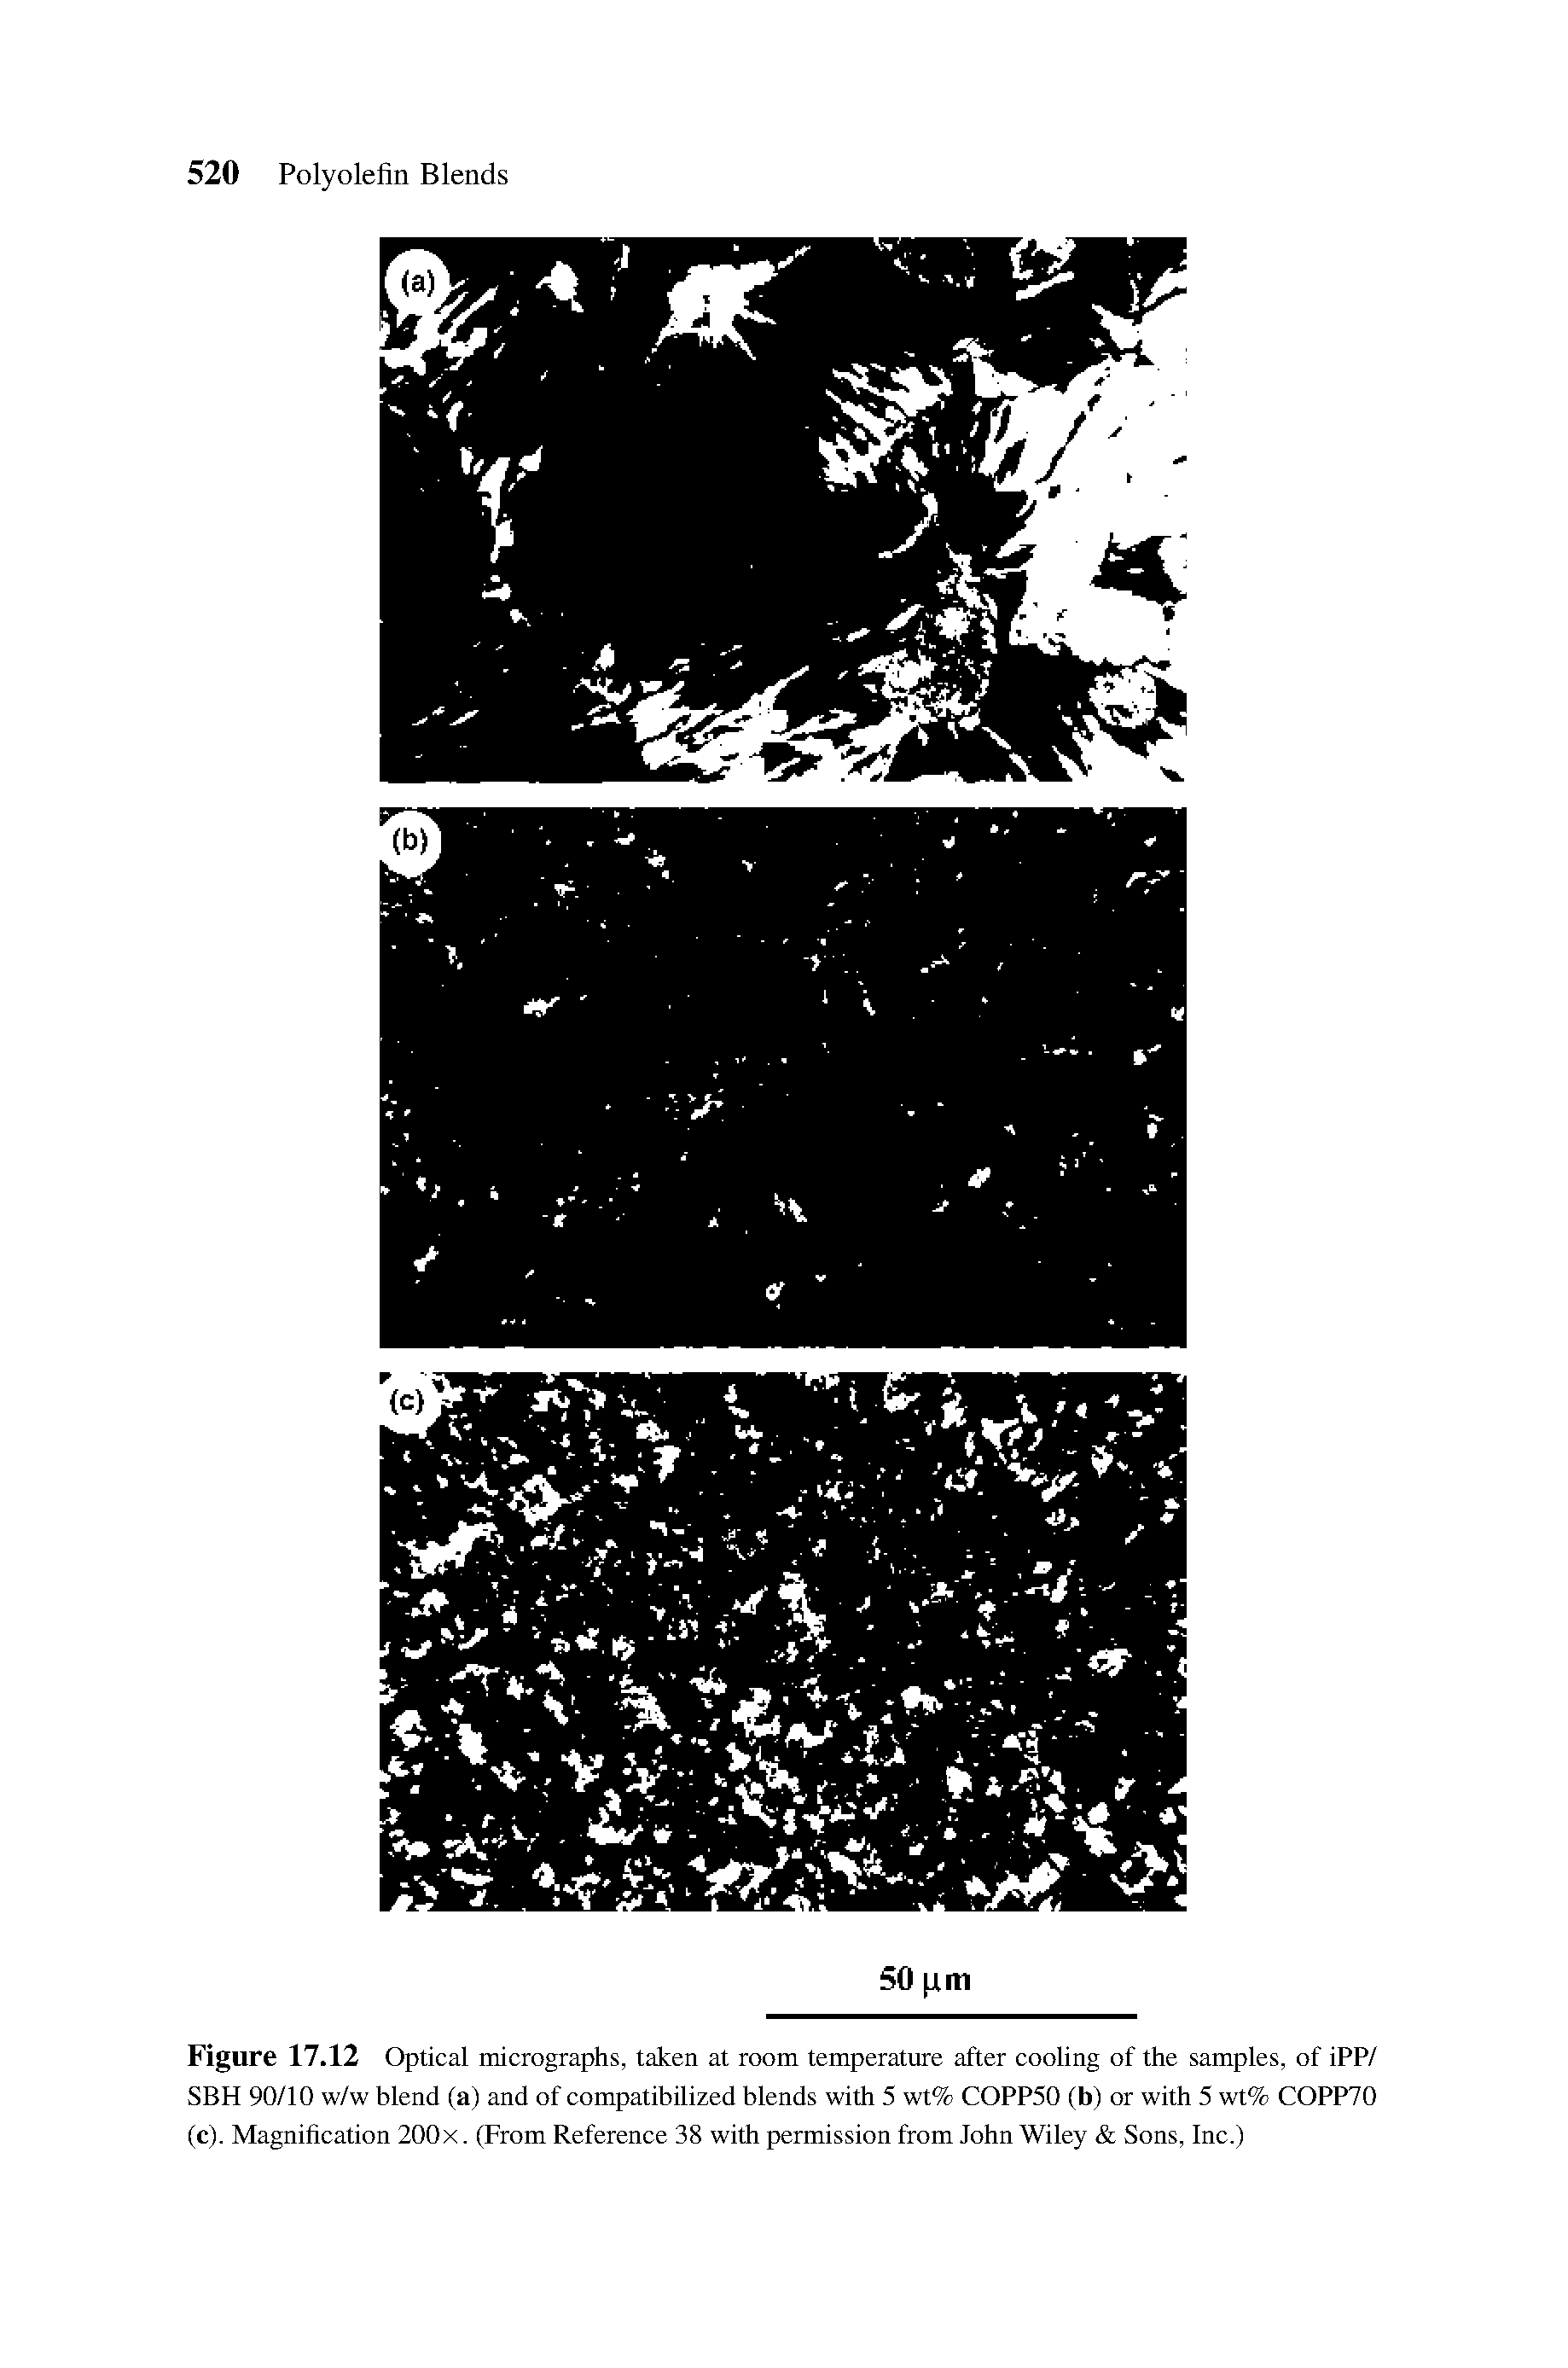 Figure 17.12 Optical micrographs, taken at room temperature after cooling of the samples, of iPP/ SBH 90/10 w/w blend (a) and of compatibilized blends with 5 wt% COPP50 (b) or with 5 wt% COPP70 (c). Magnification 200x. (From Reference 38 with permission from John Wiley Sons, Inc.)...